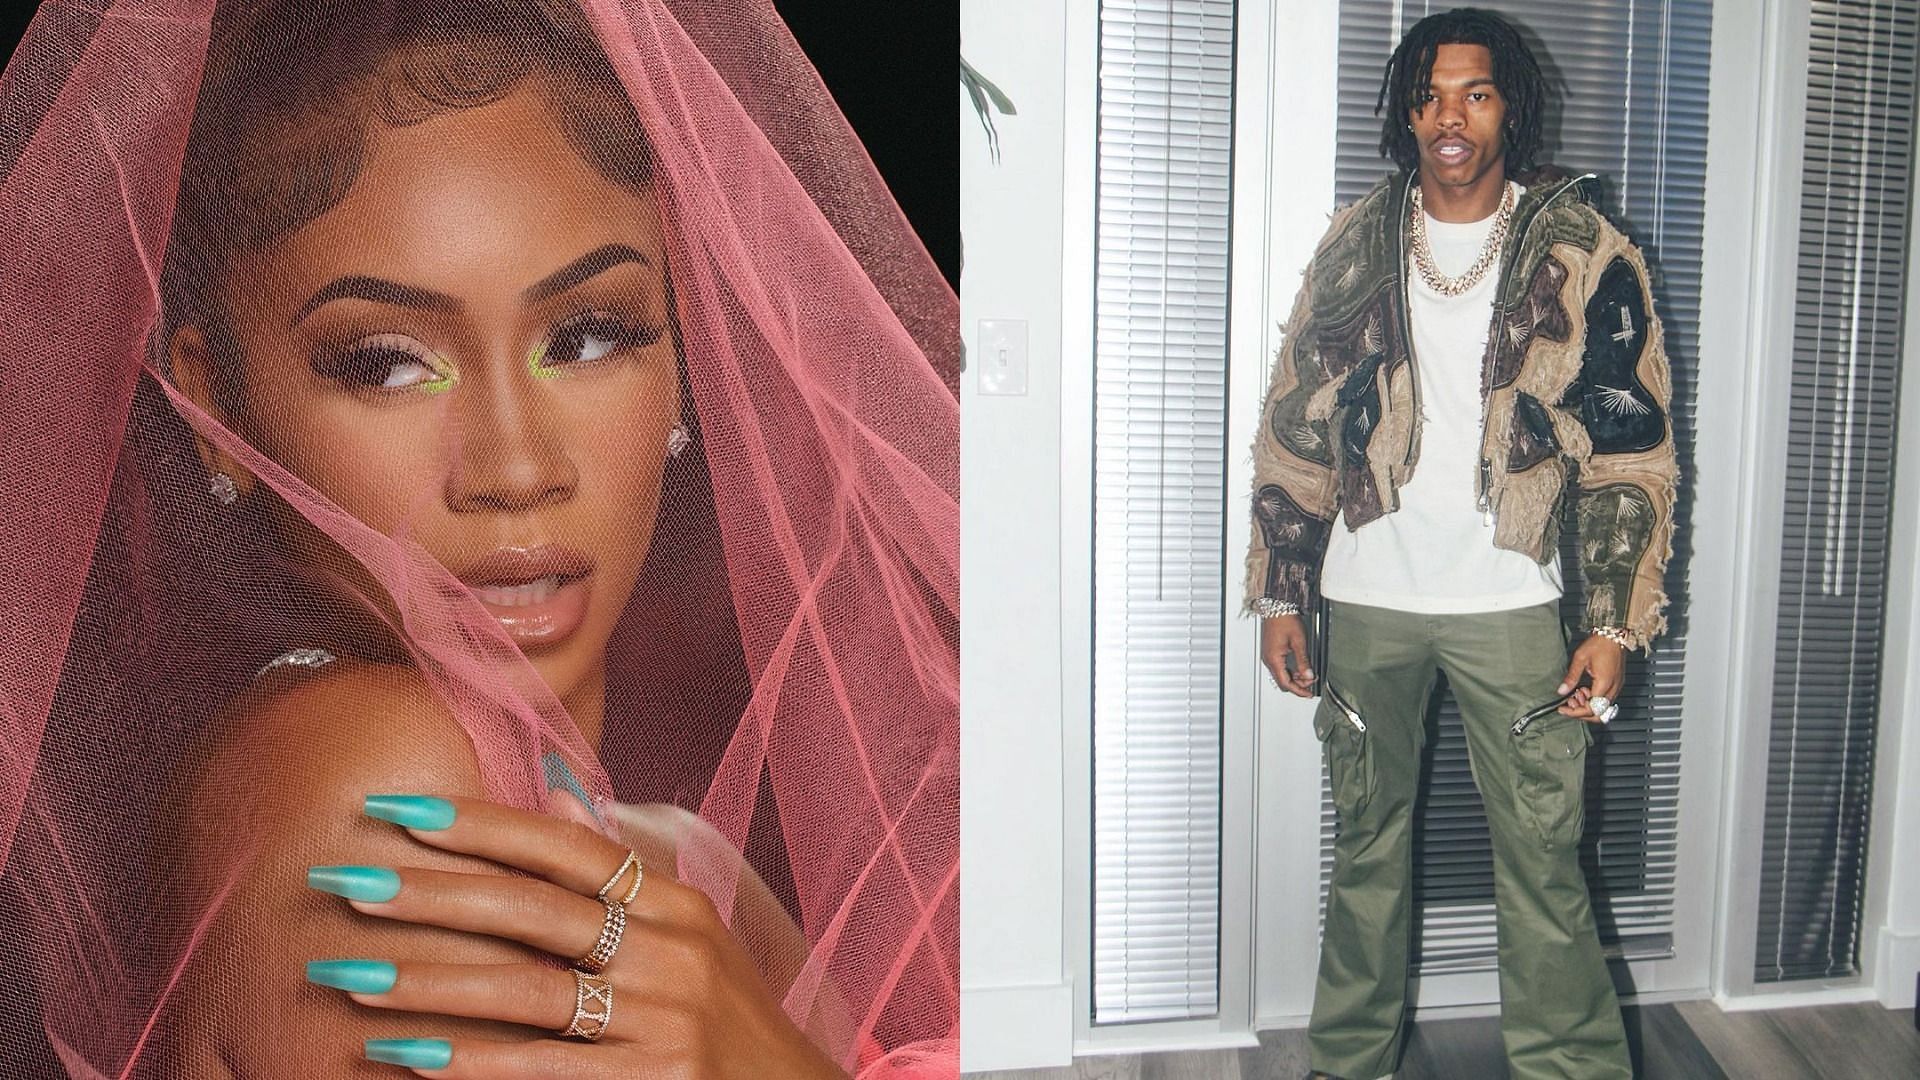 Saweetie recently sparked romance rumors with Lil Baby (Image via Saweetie/Instagram and Lil Baby/Instagram)